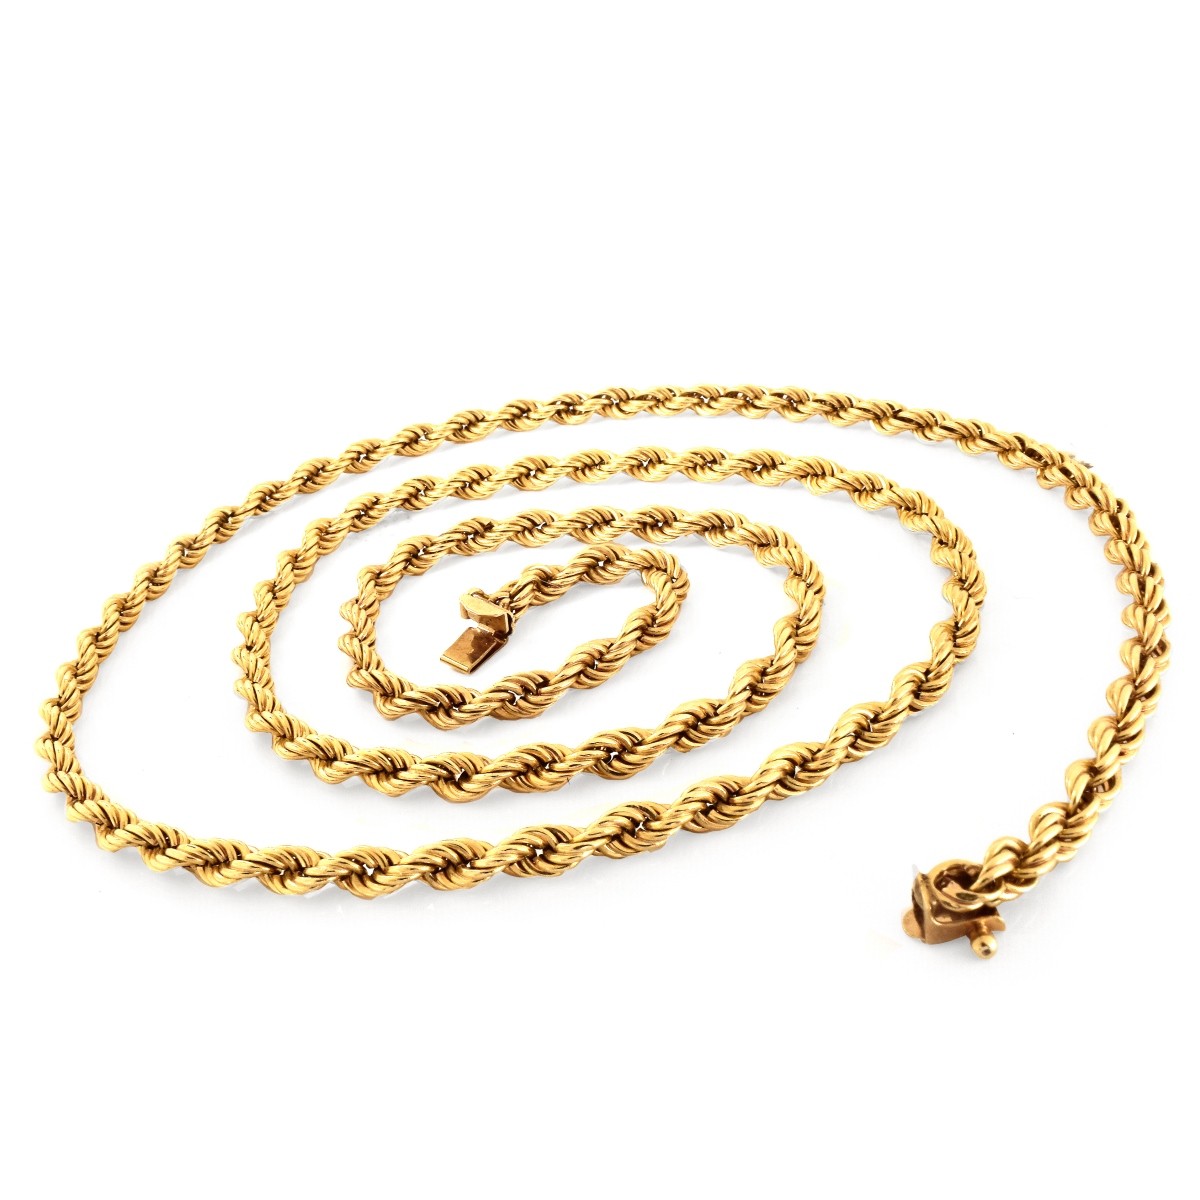 30" 14K Gold Rope Chain